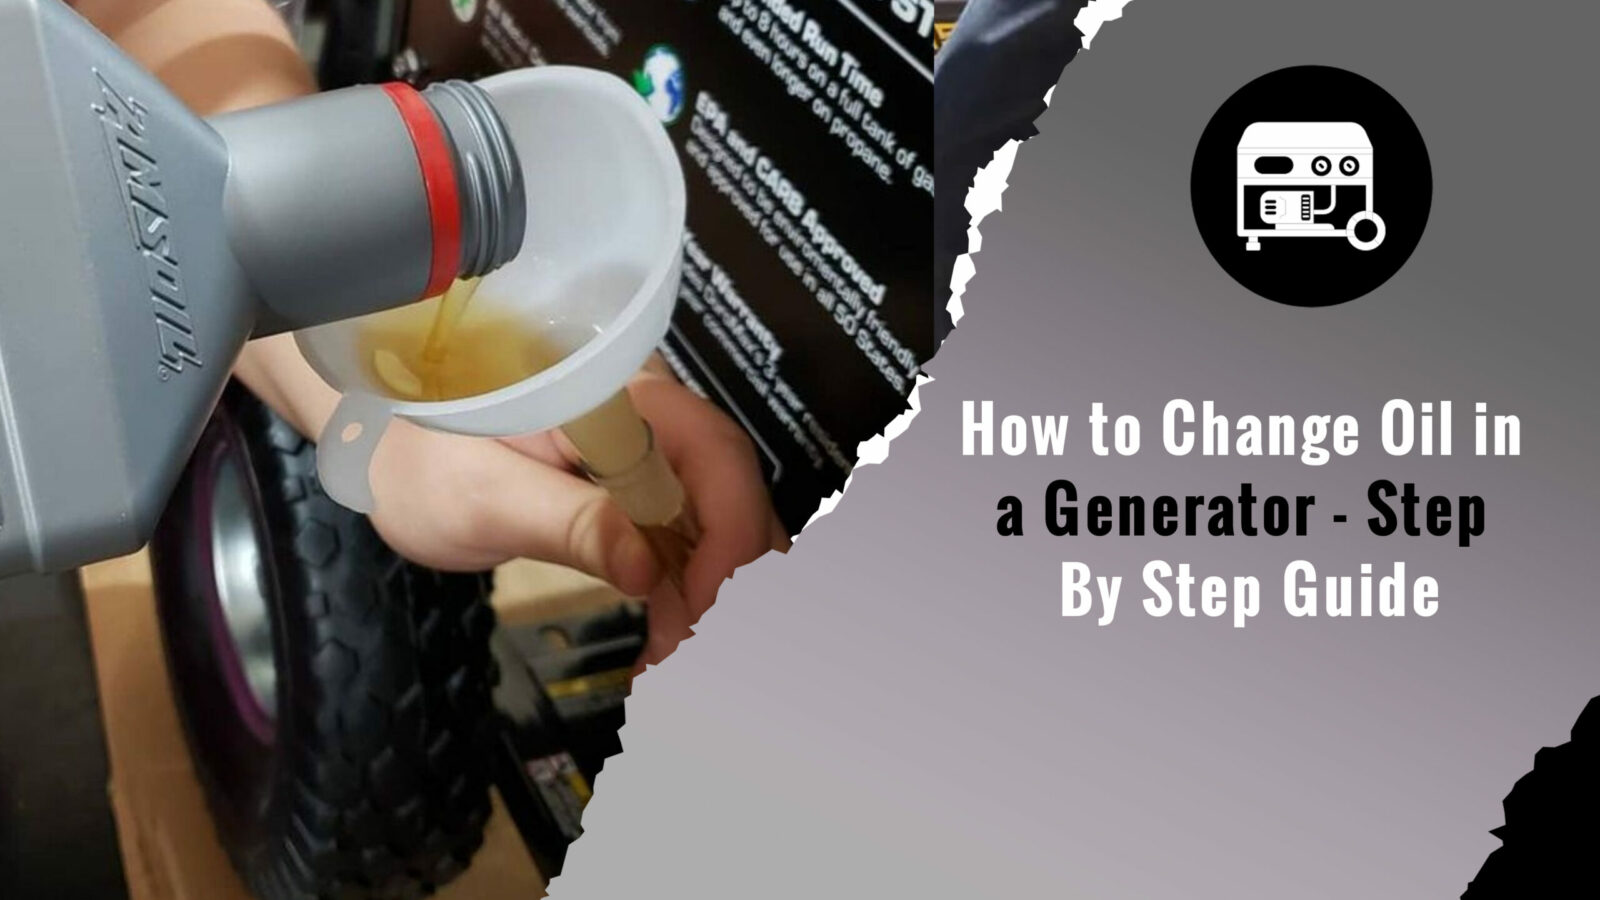 How to Change Oil in a Generator - Step By Step Guide